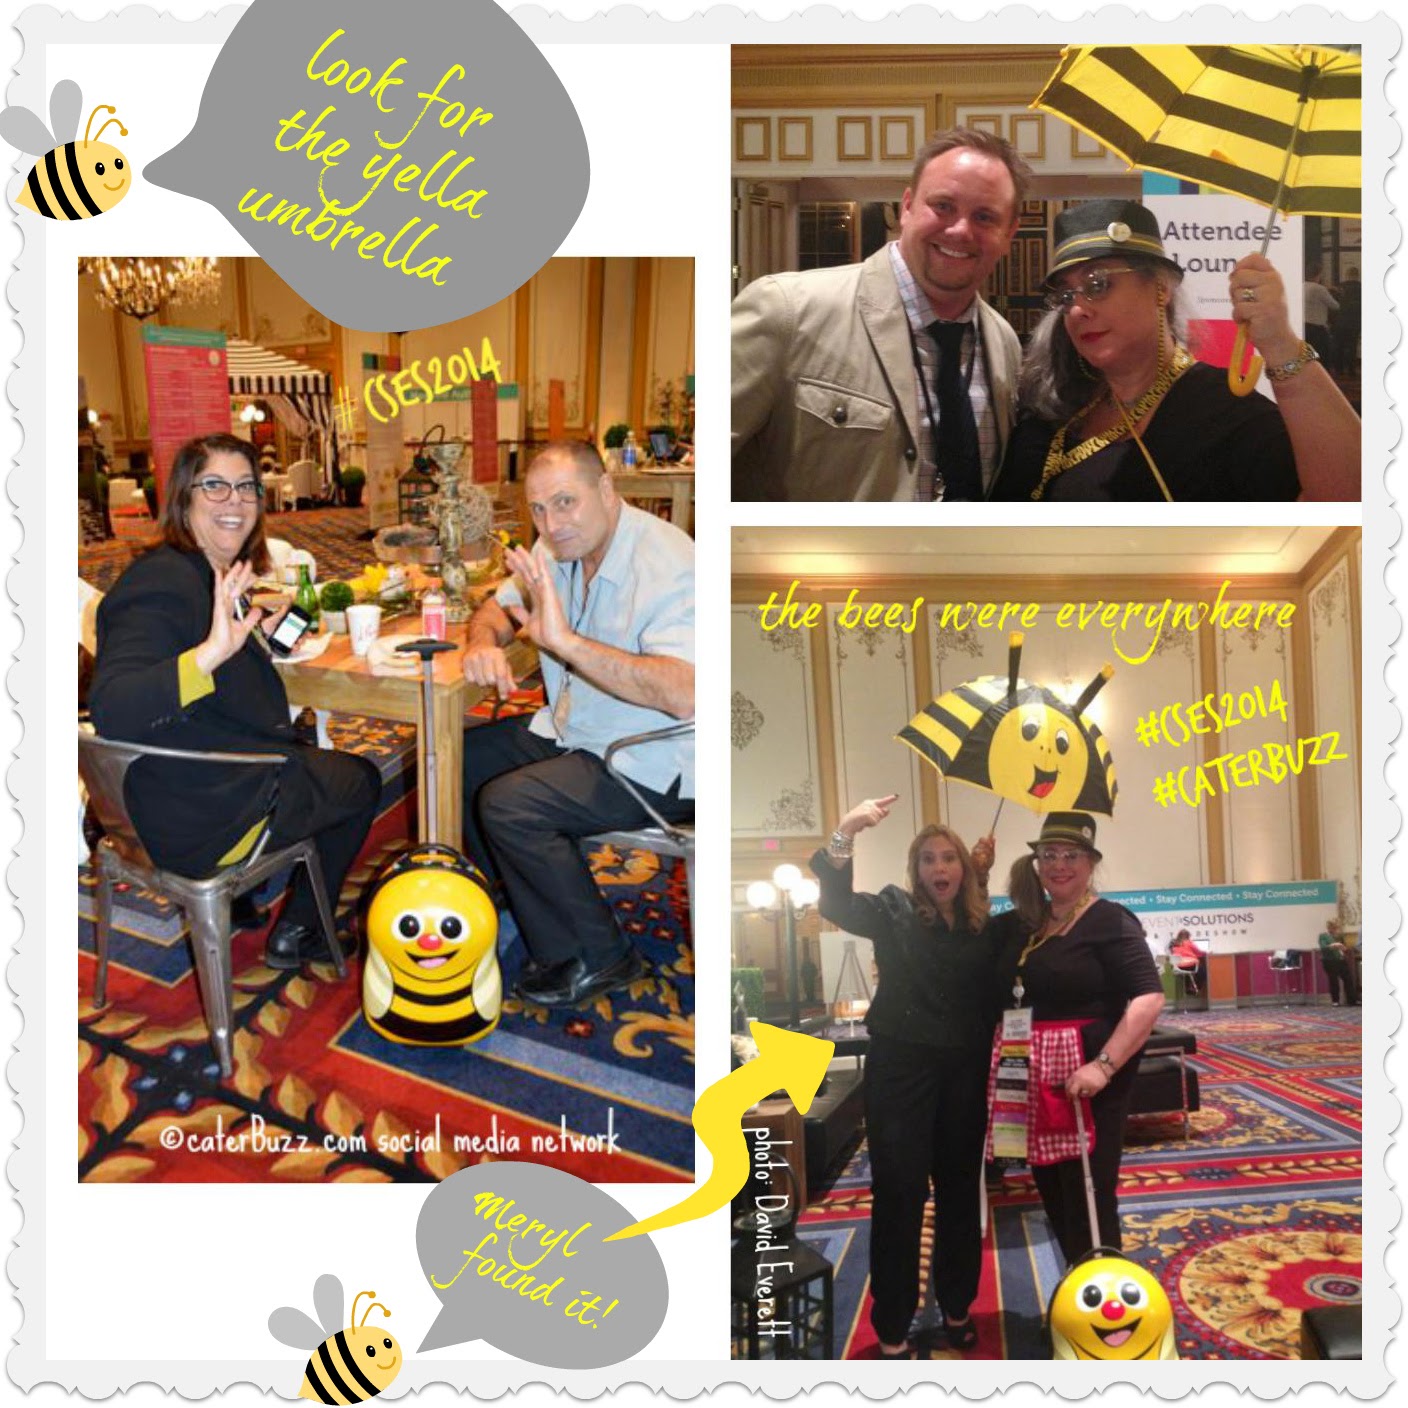 © caterBuzz.com social media network - Meryl Snow and Lisa Teiger under the Yella Umbrella with Roll-e-bee #CSES2014 Catersource Convention in Las Vegas